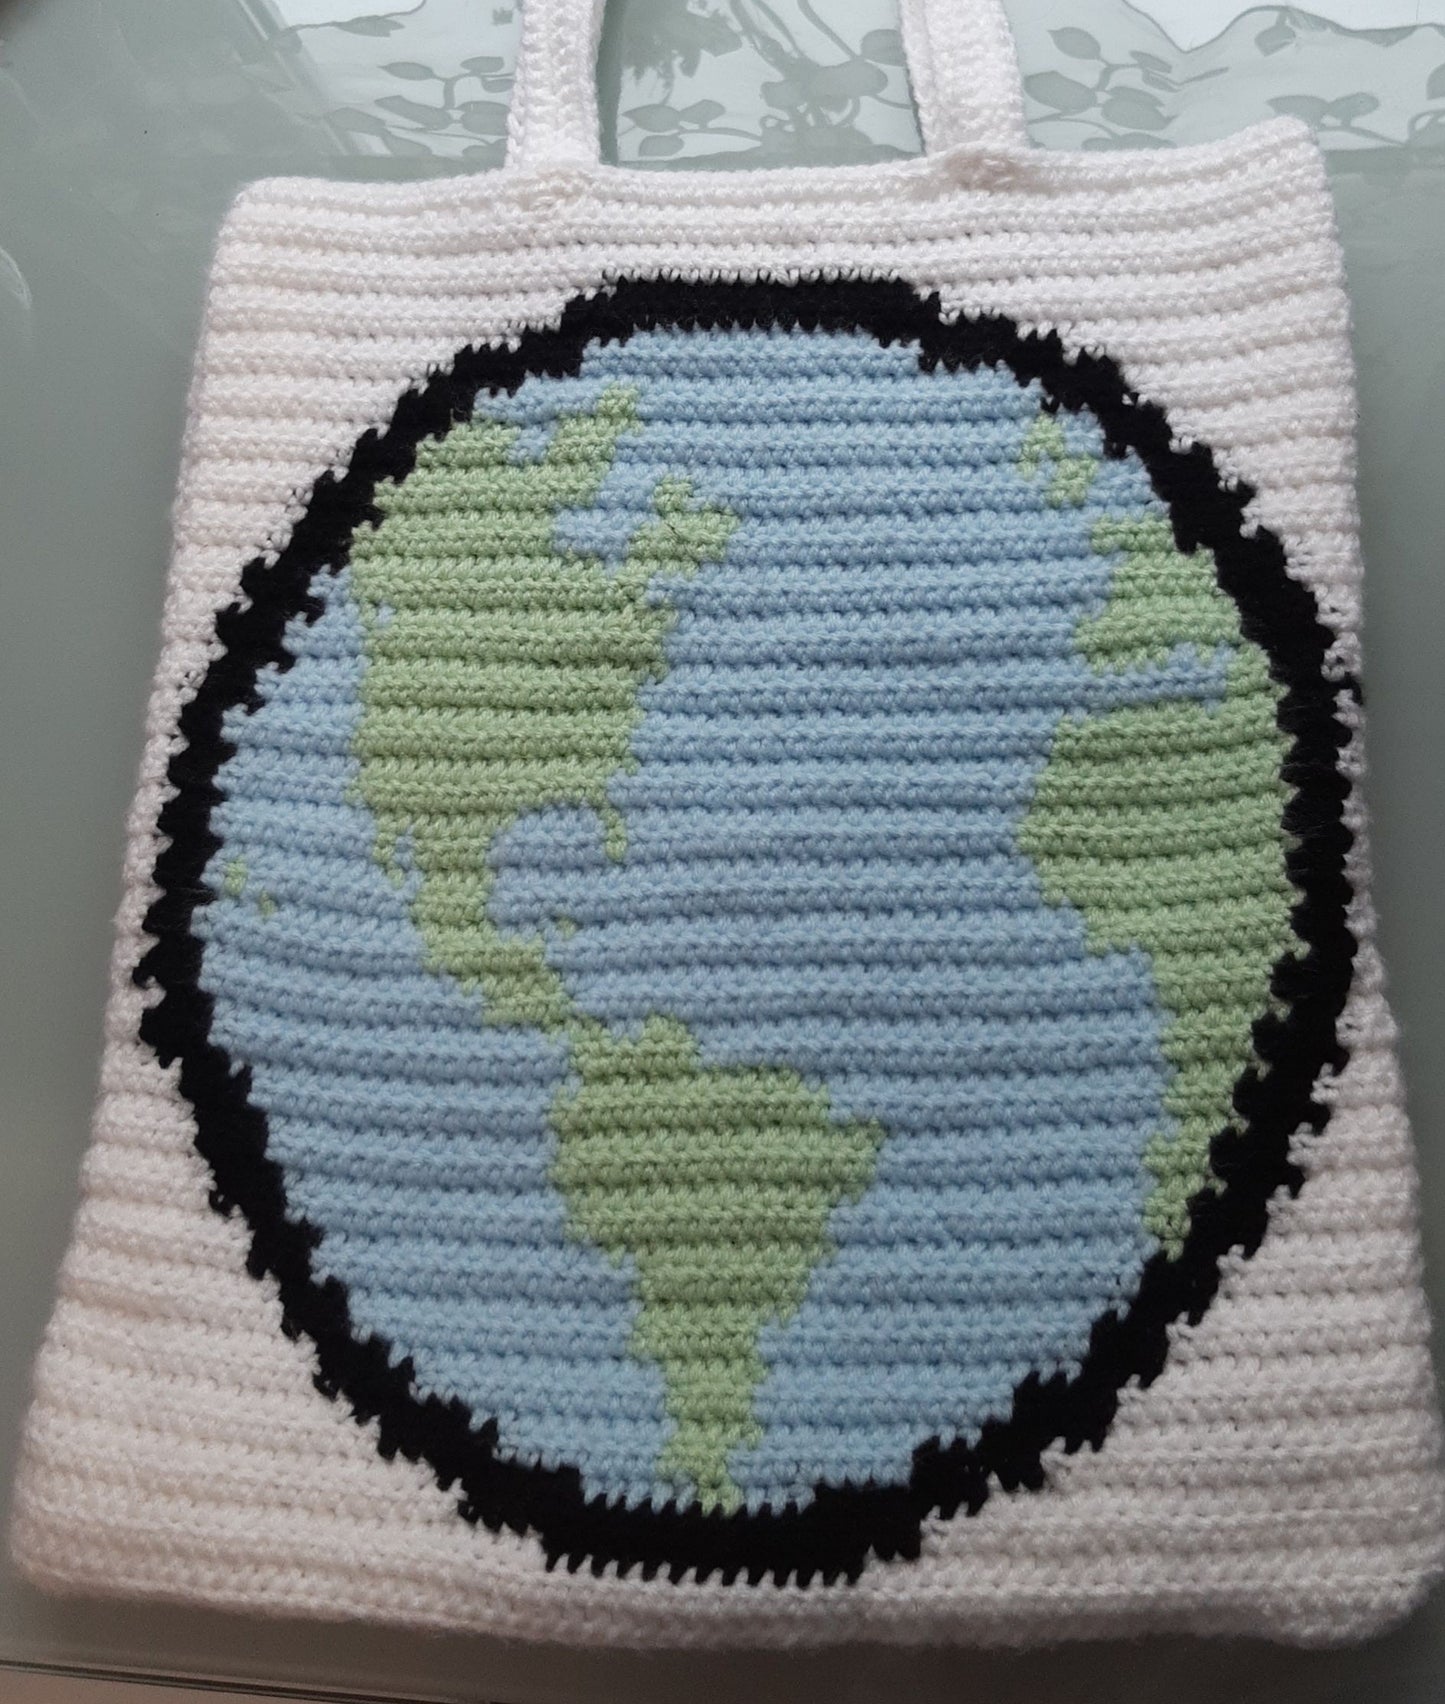 pattern: stop f*cking up the earth tote